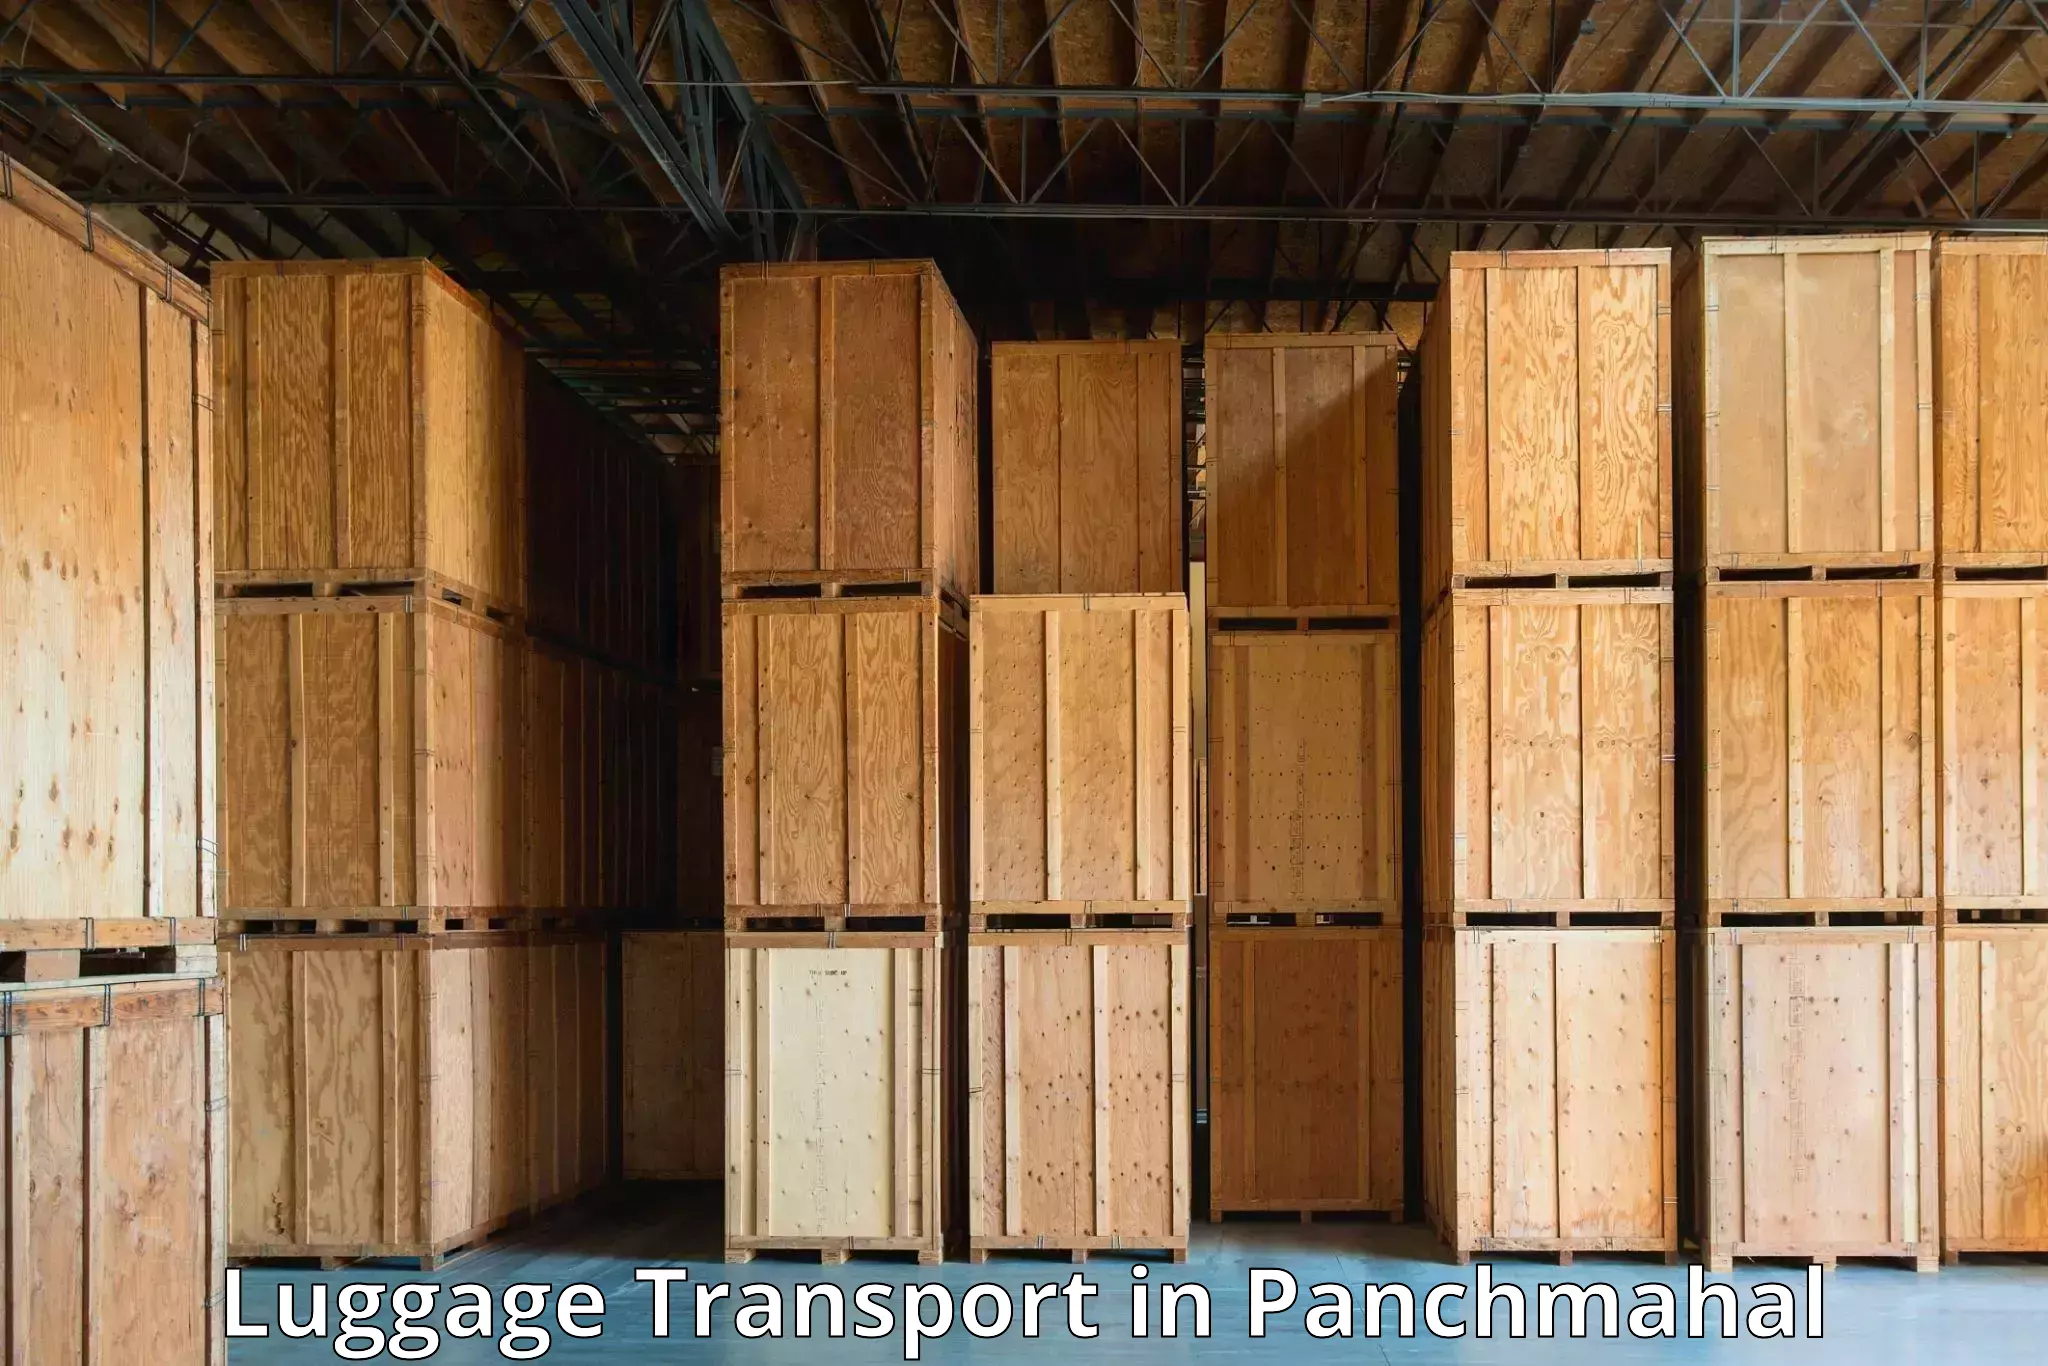 Luggage transport consulting in Panchmahal